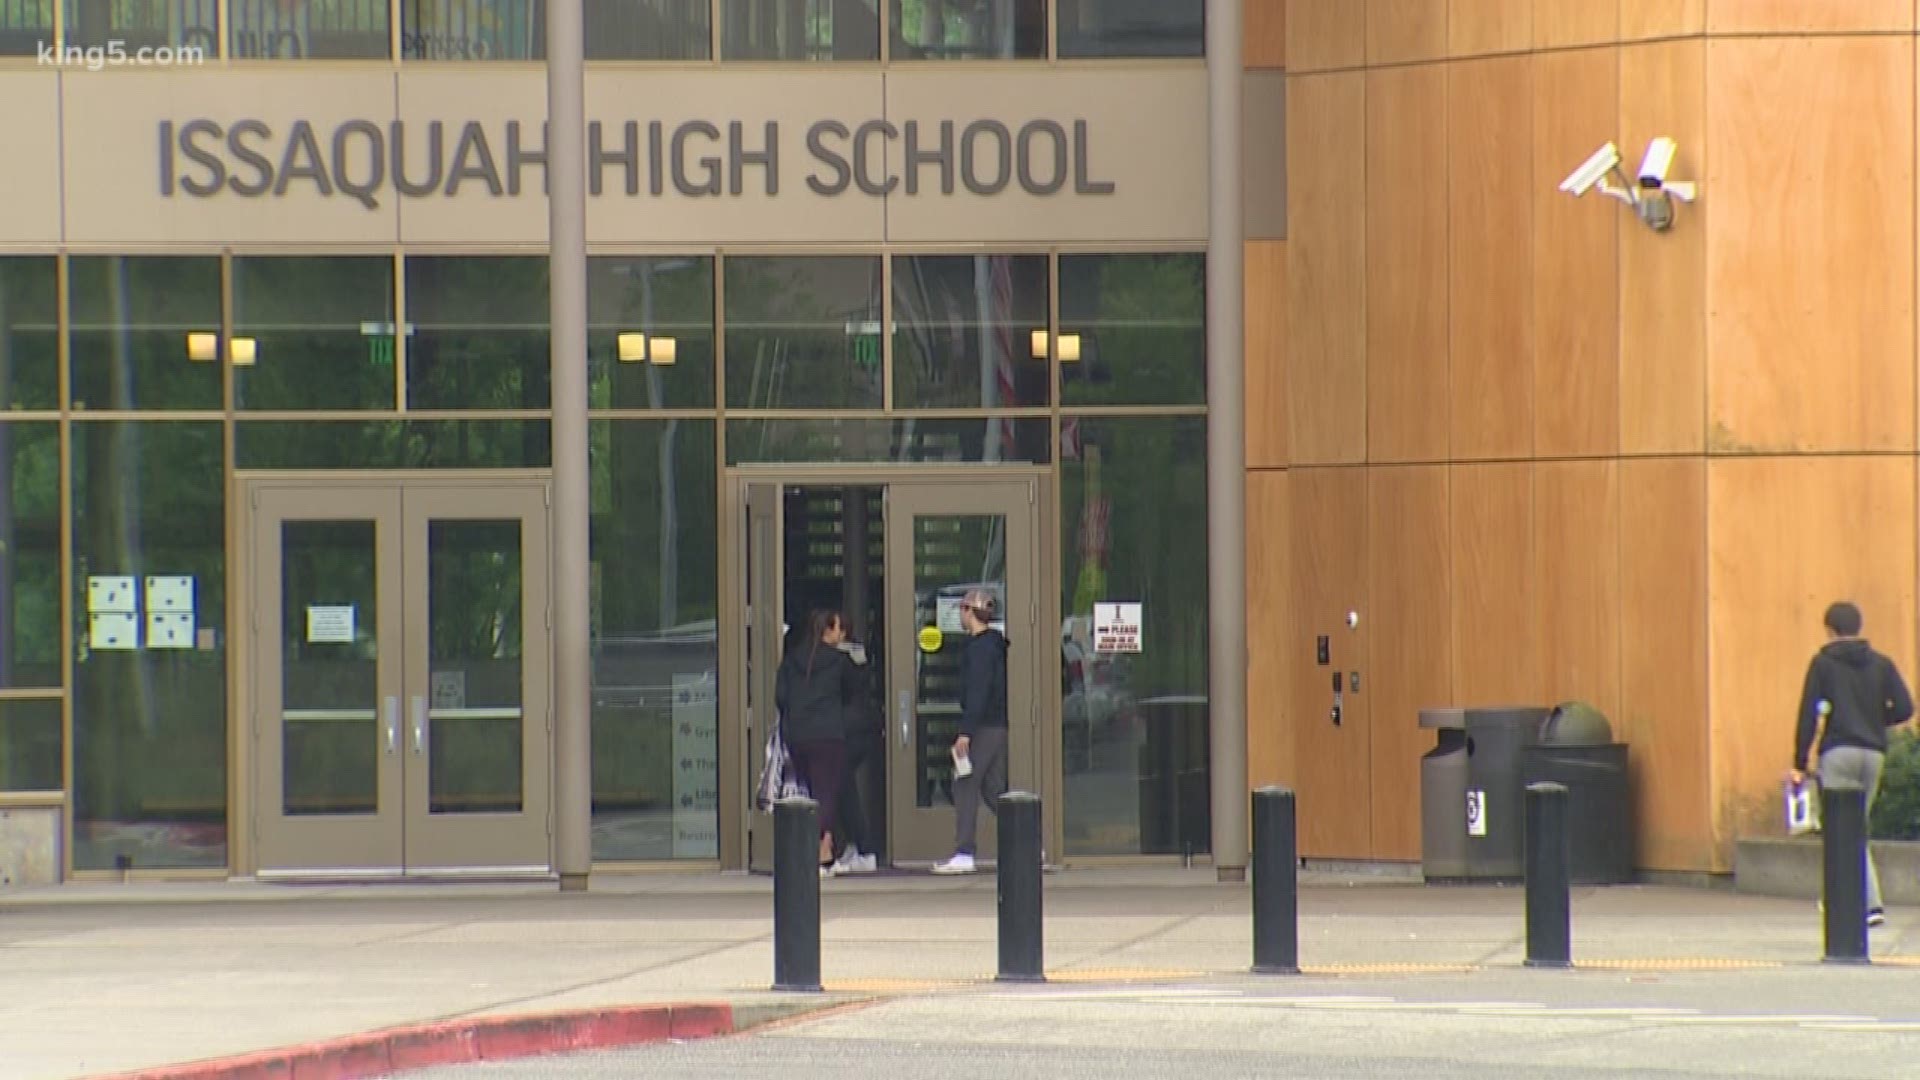 Issaquah High School will reopen Friday after closing because a staff member contracted measles. The district said the majority of students are vaccinated, but it needed to take the day to collect records from staff.